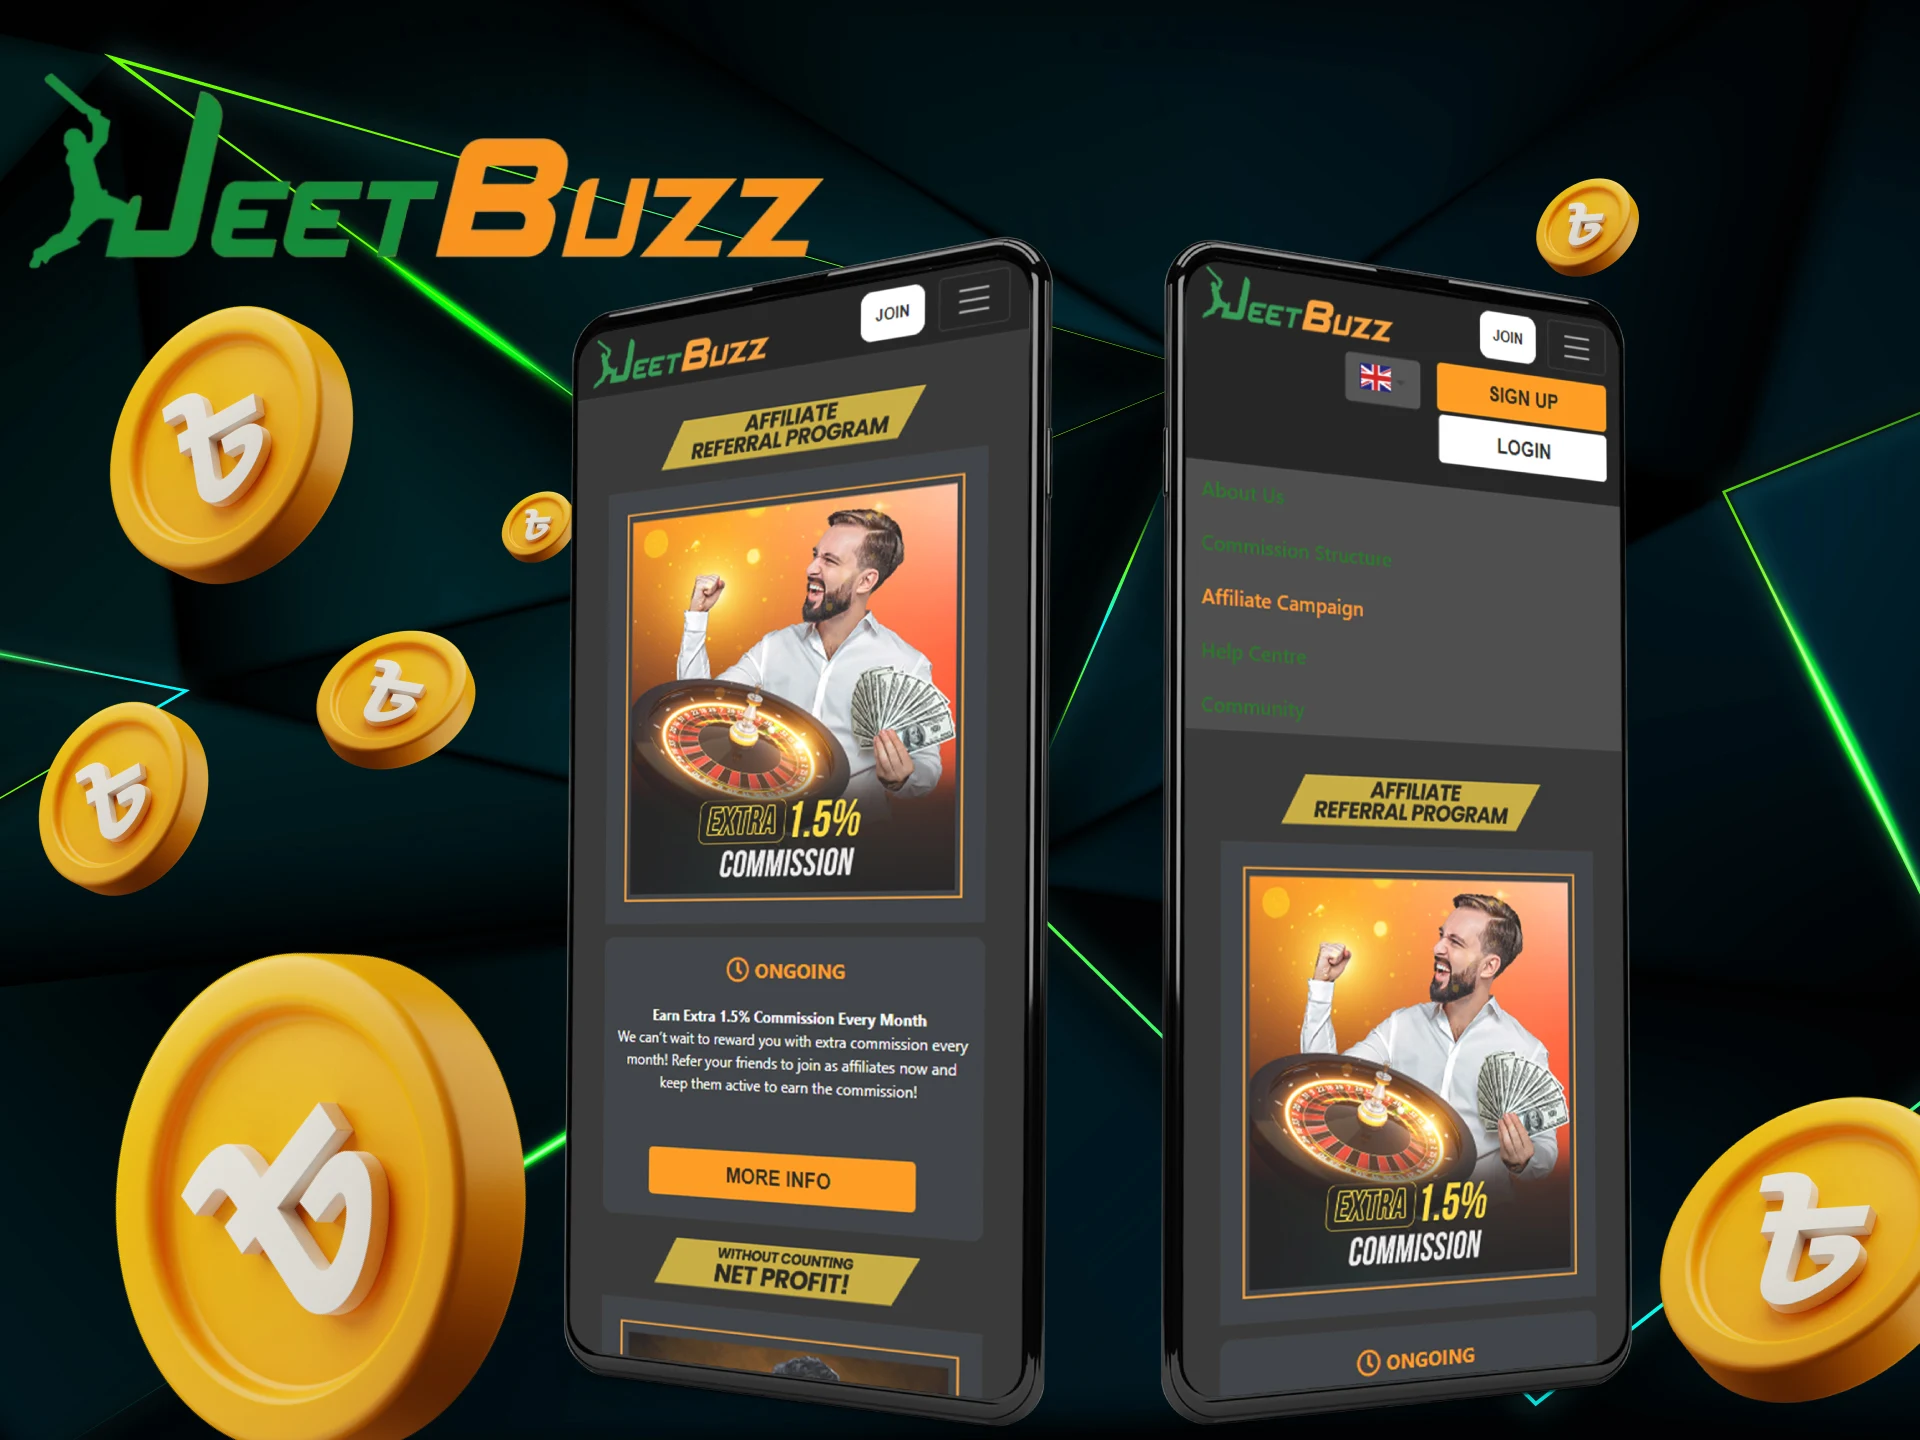 Use the instructions to download the JeetBuzz affiliate app on your phone.